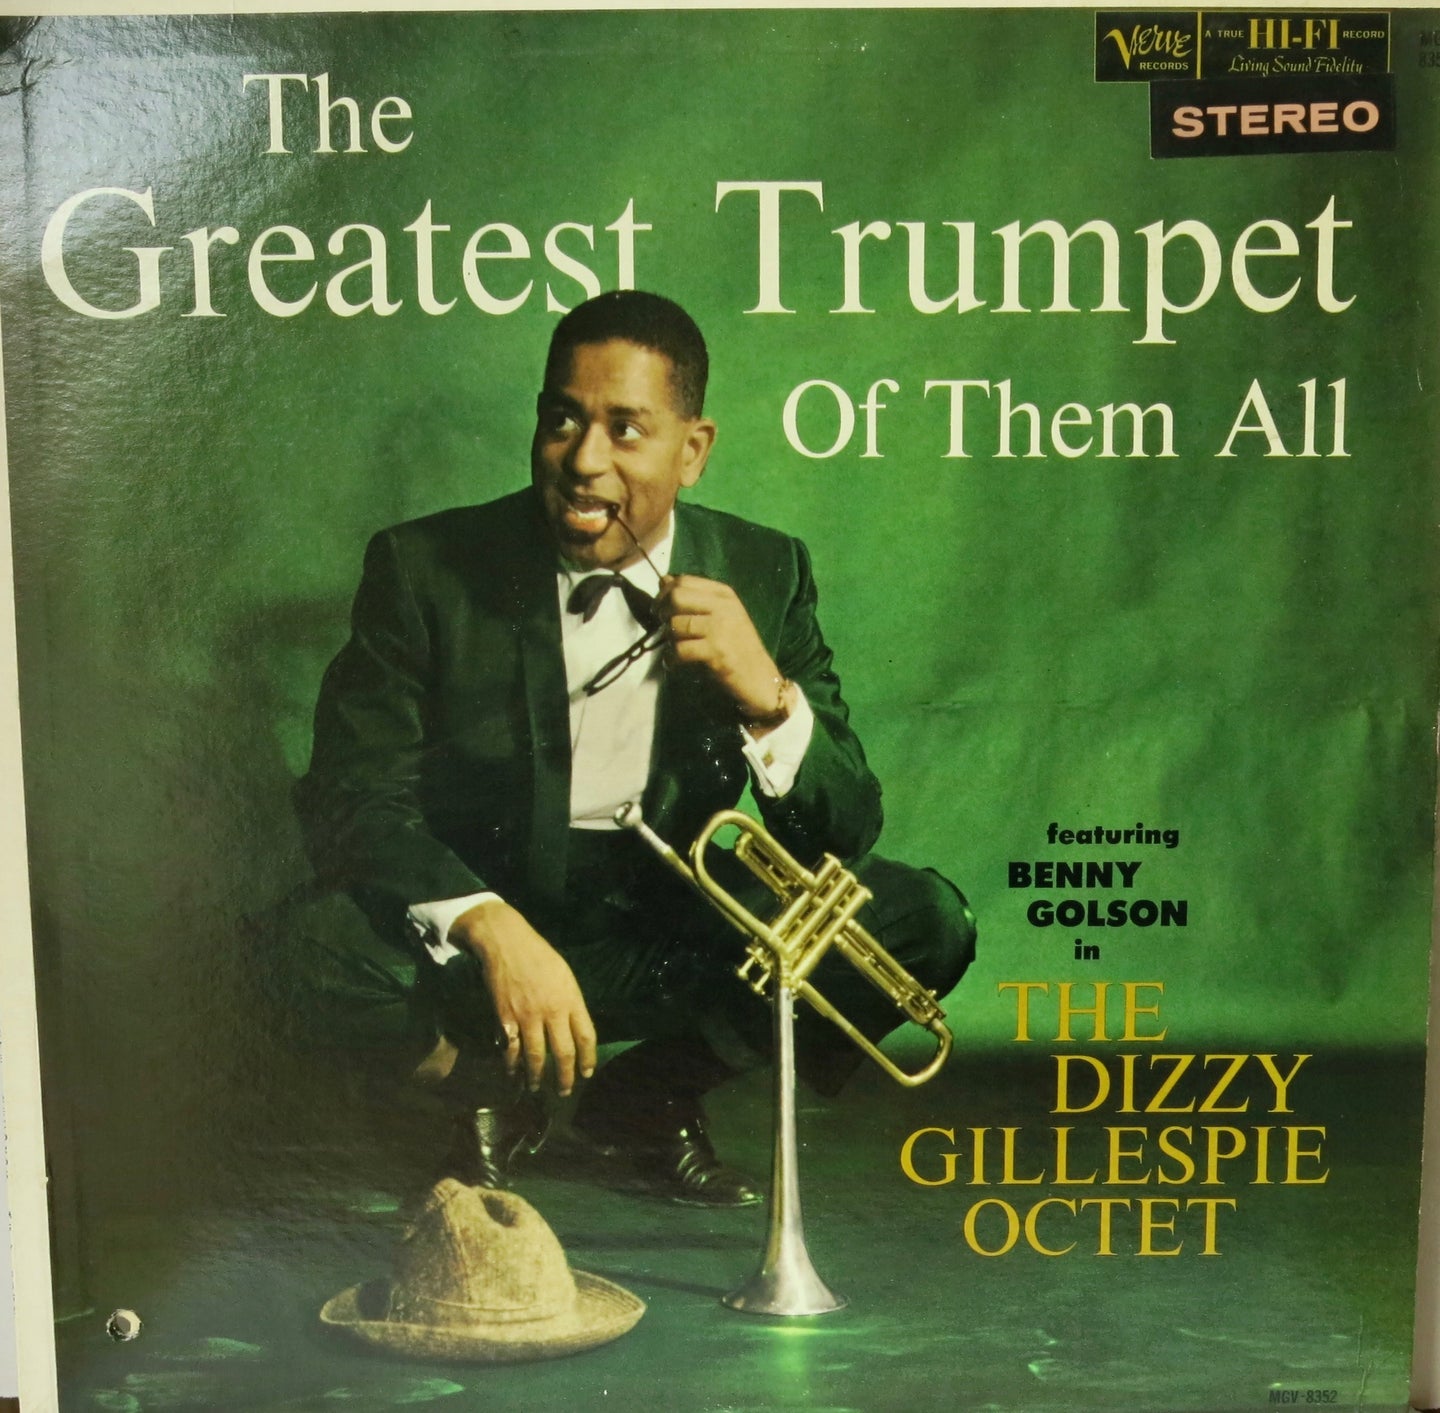 The Dizzy Gillespie Octet Featuring Benny Golson ‎– The Greatest Trumpet Of Them All | Vinyl Record by Verve | Friedman & Sons